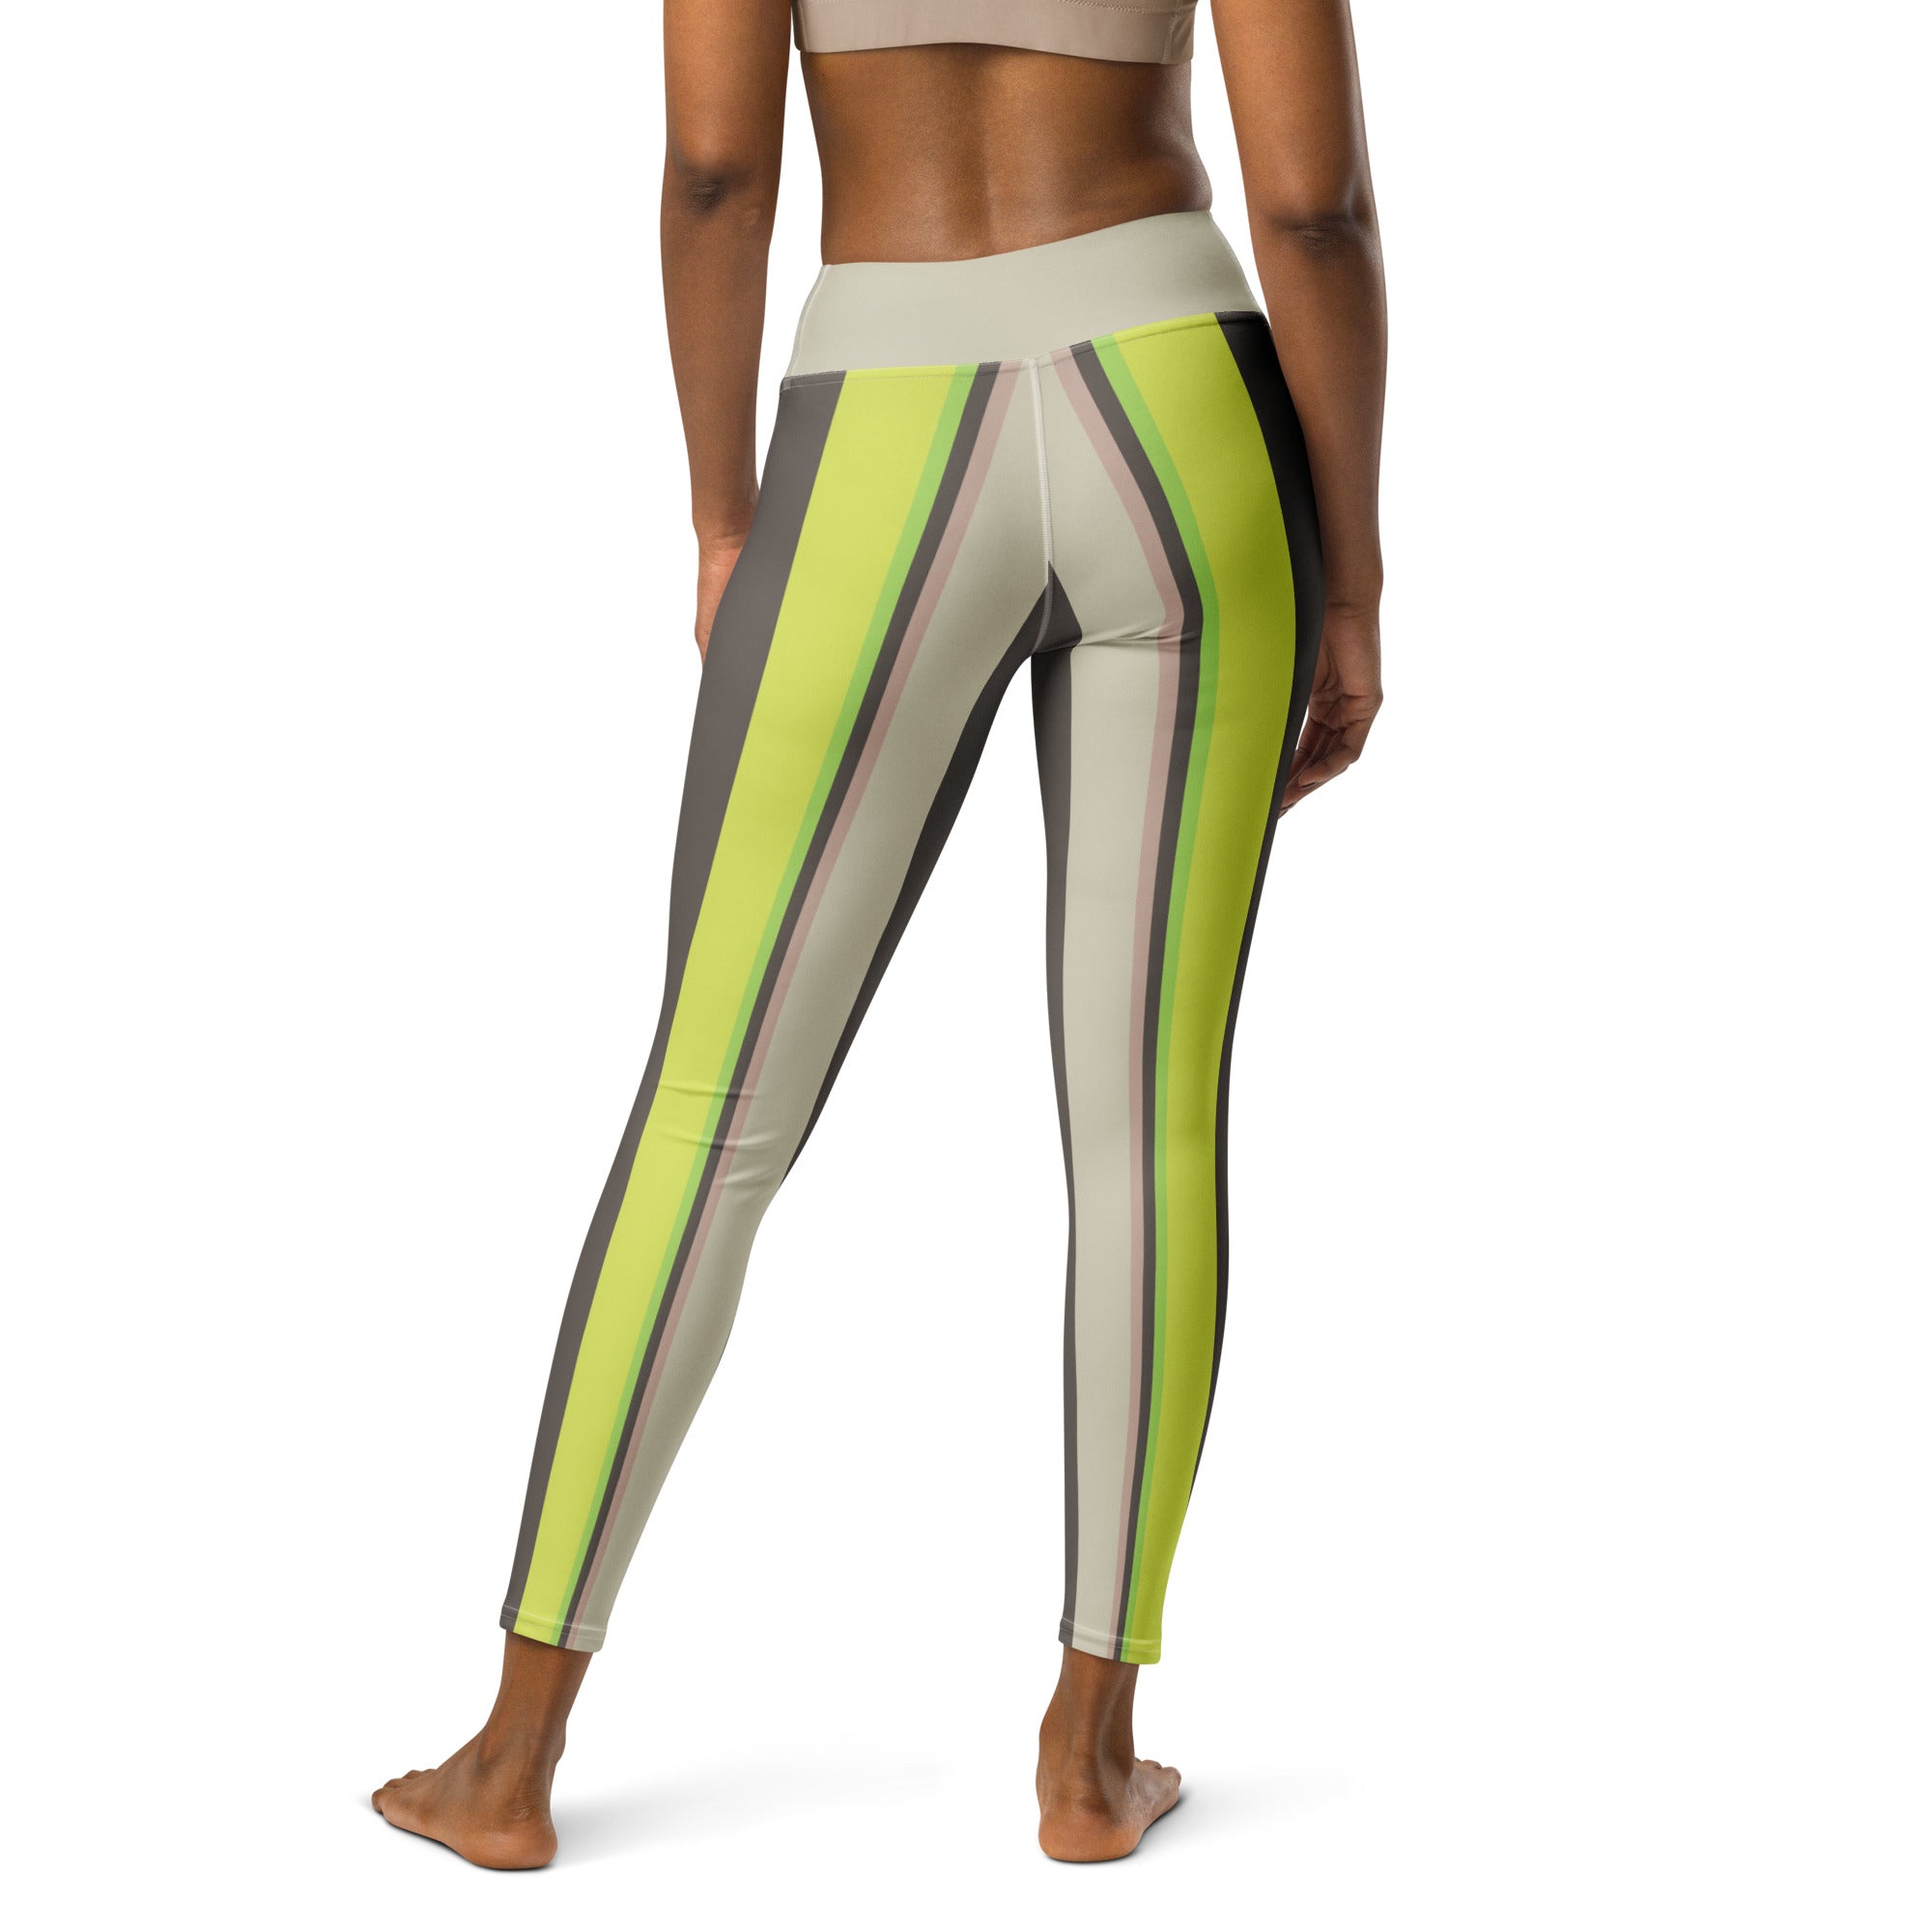 Soft, flexible yoga leggings with Zen garden print, ideal for meditation and movement.